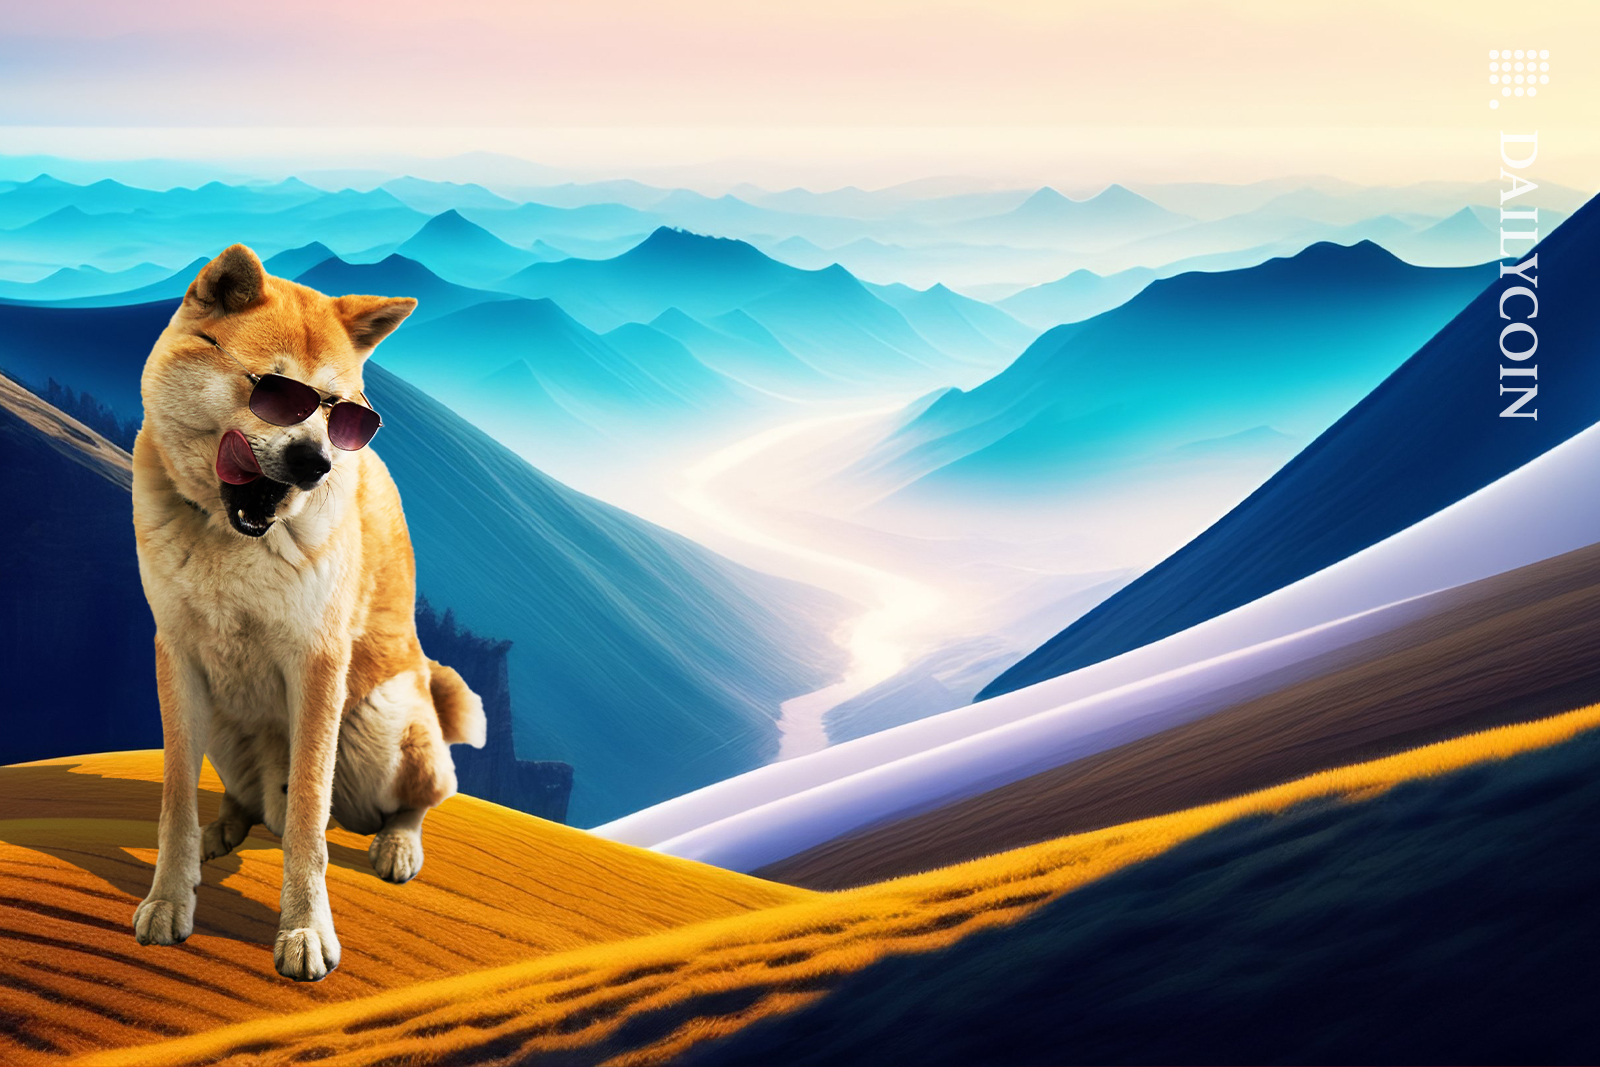 Shiba inu looking cool after a long journey over the hills.